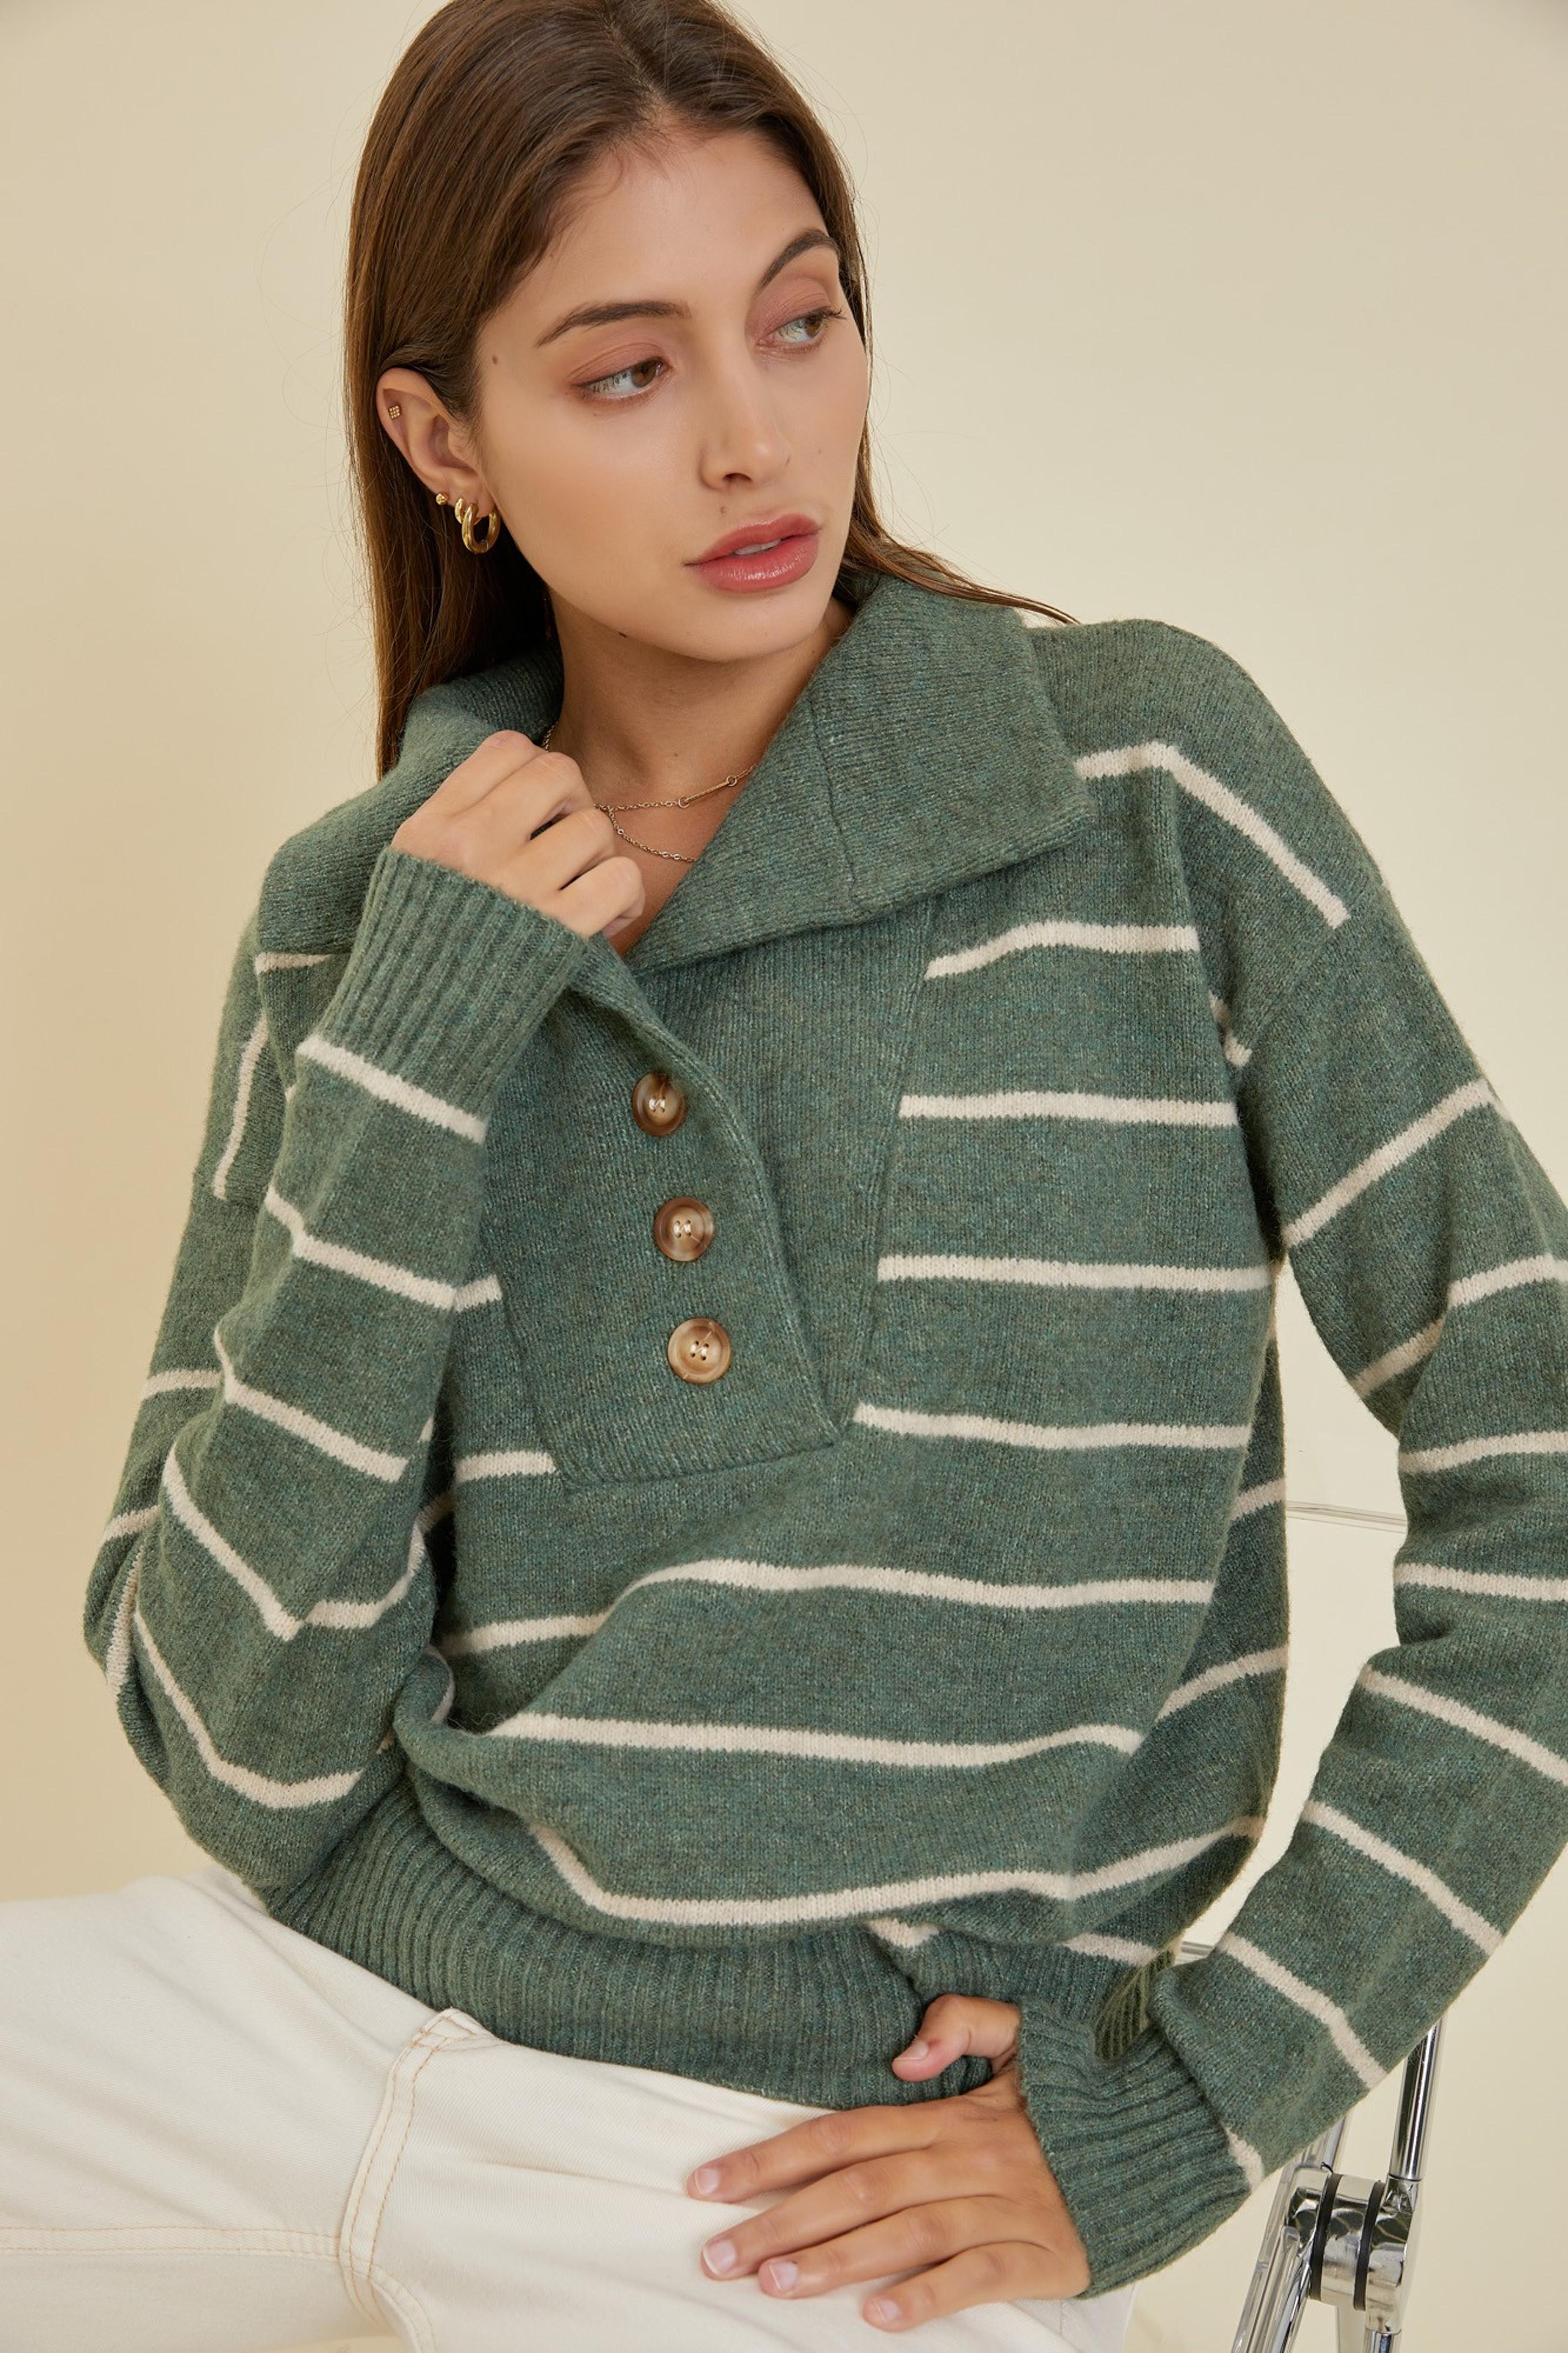  The Brooke Collared Sweater W/Buttons